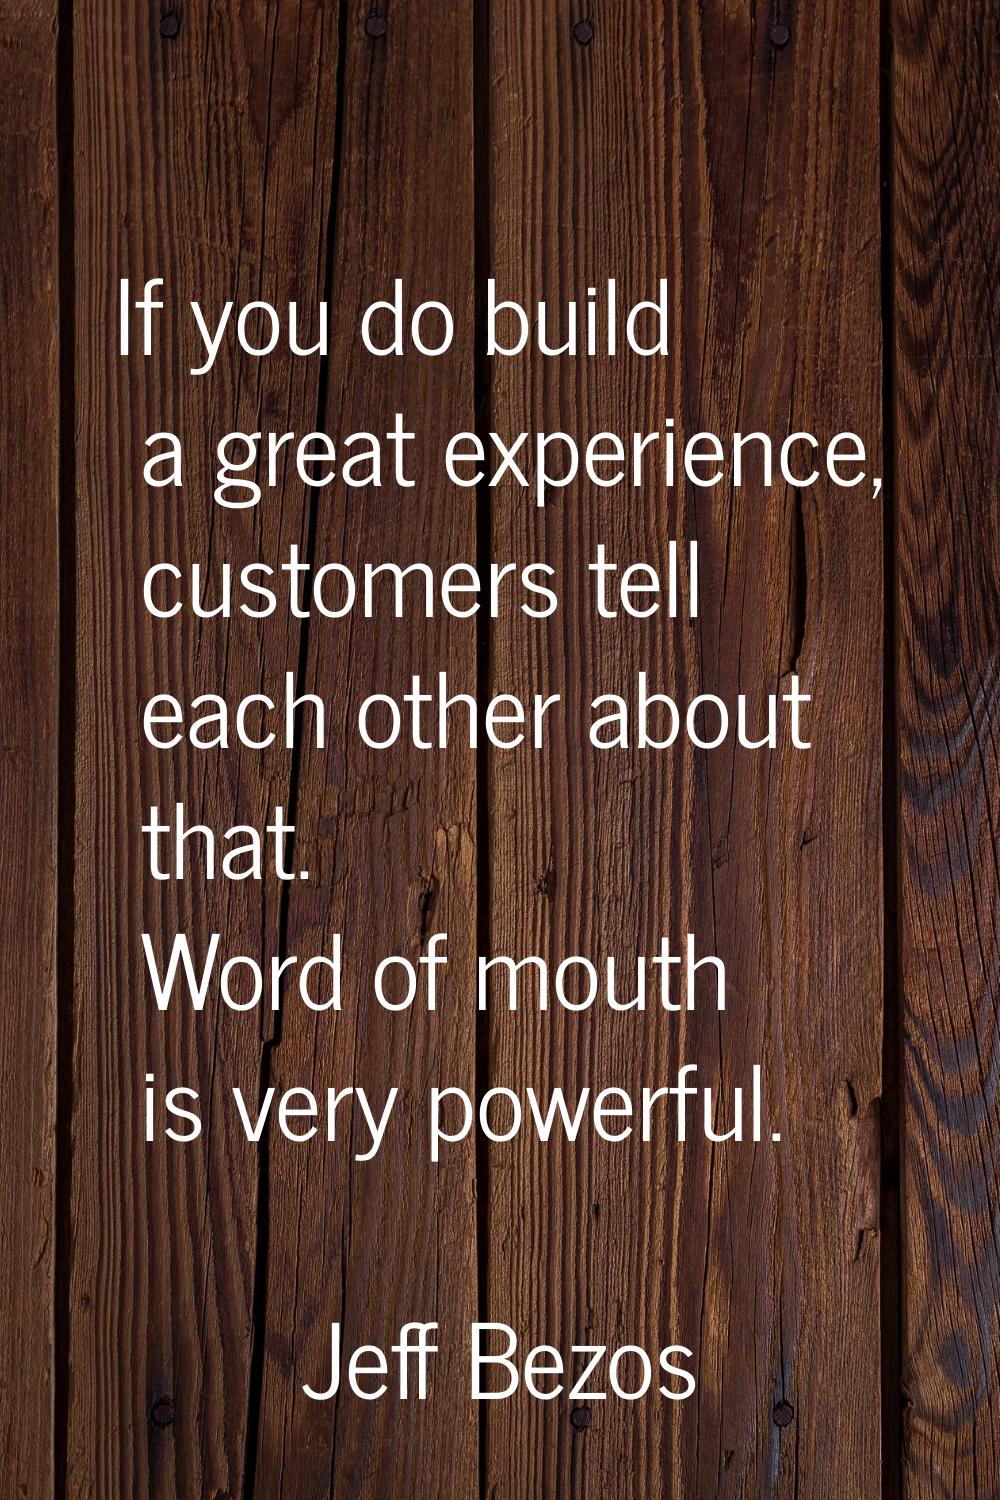 If you do build a great experience, customers tell each other about that. Word of mouth is very pow